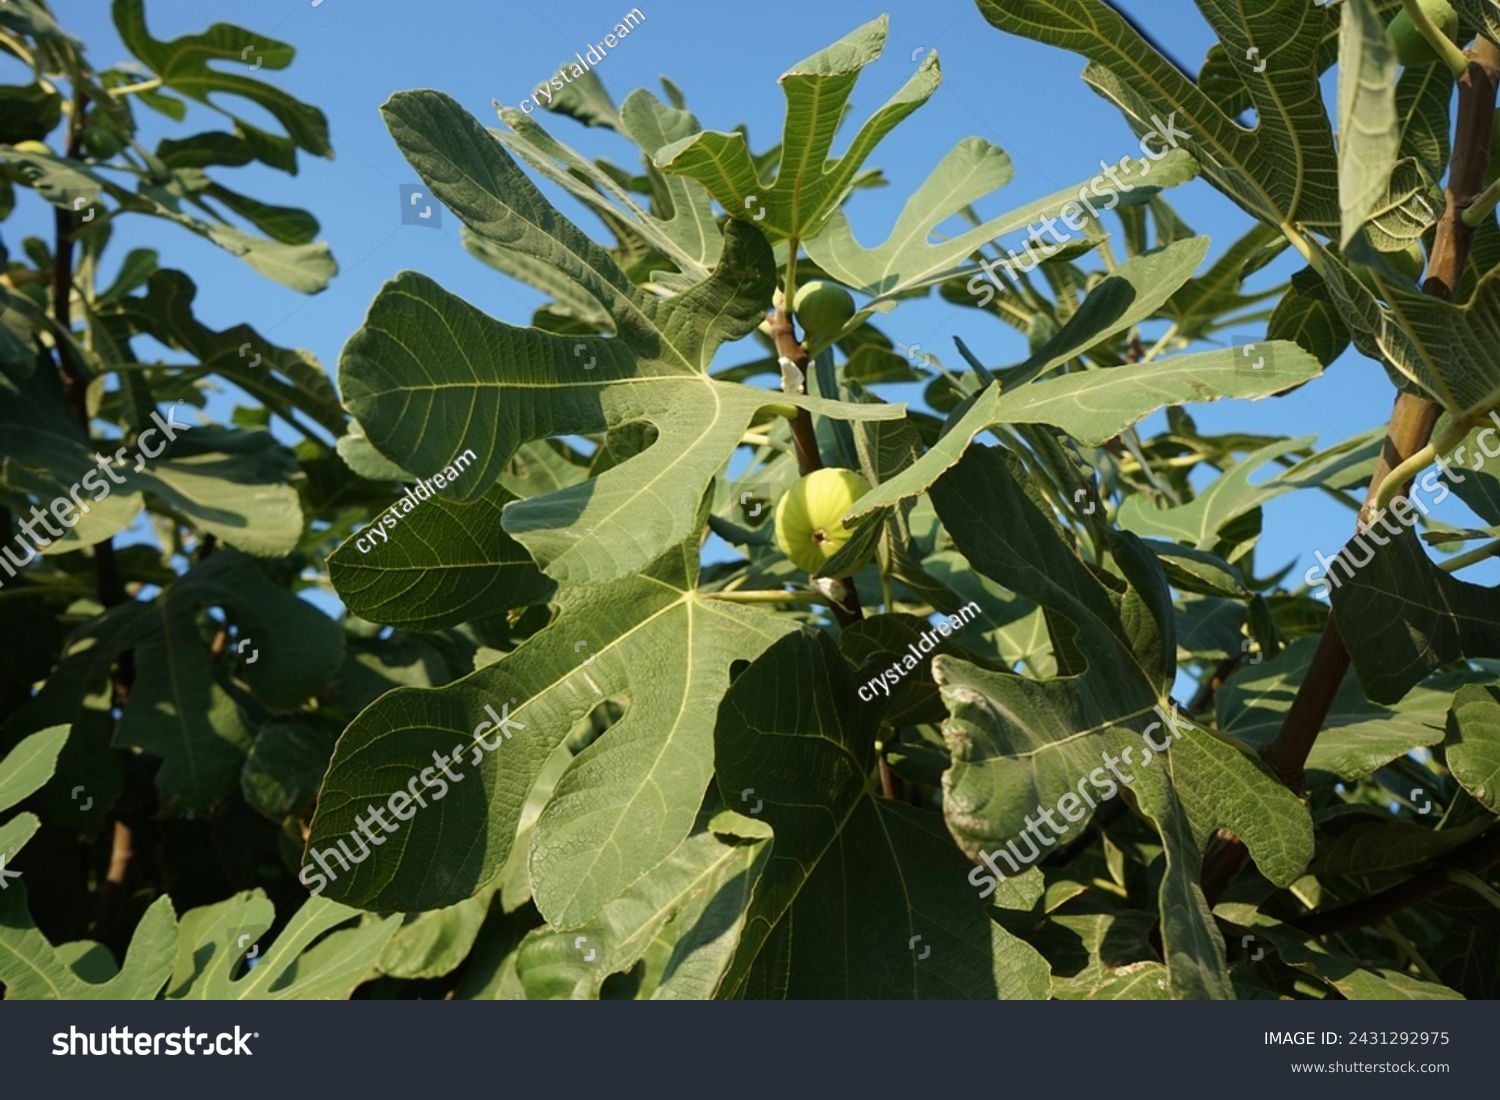 Ficus carica with fruits grows in August. The fig is the edible fruit of Ficus carica, a species of small tree in the flowering plant family Moraceae. Rhodes Island, Greece #2431292975